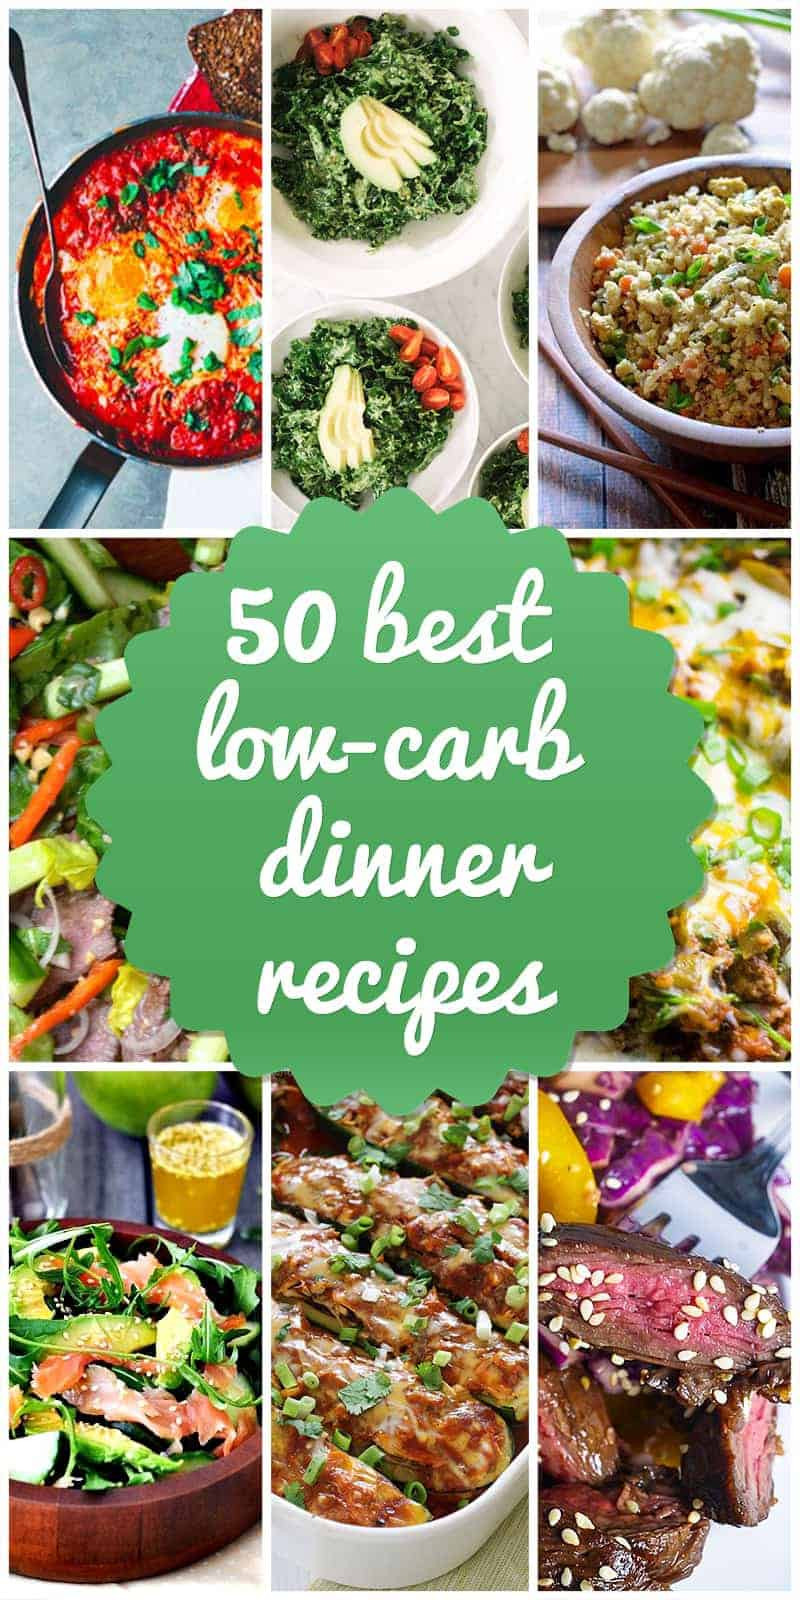 Low Carb Dinner Options
 50 Best Low Carb Dinners Recipes and Ideas